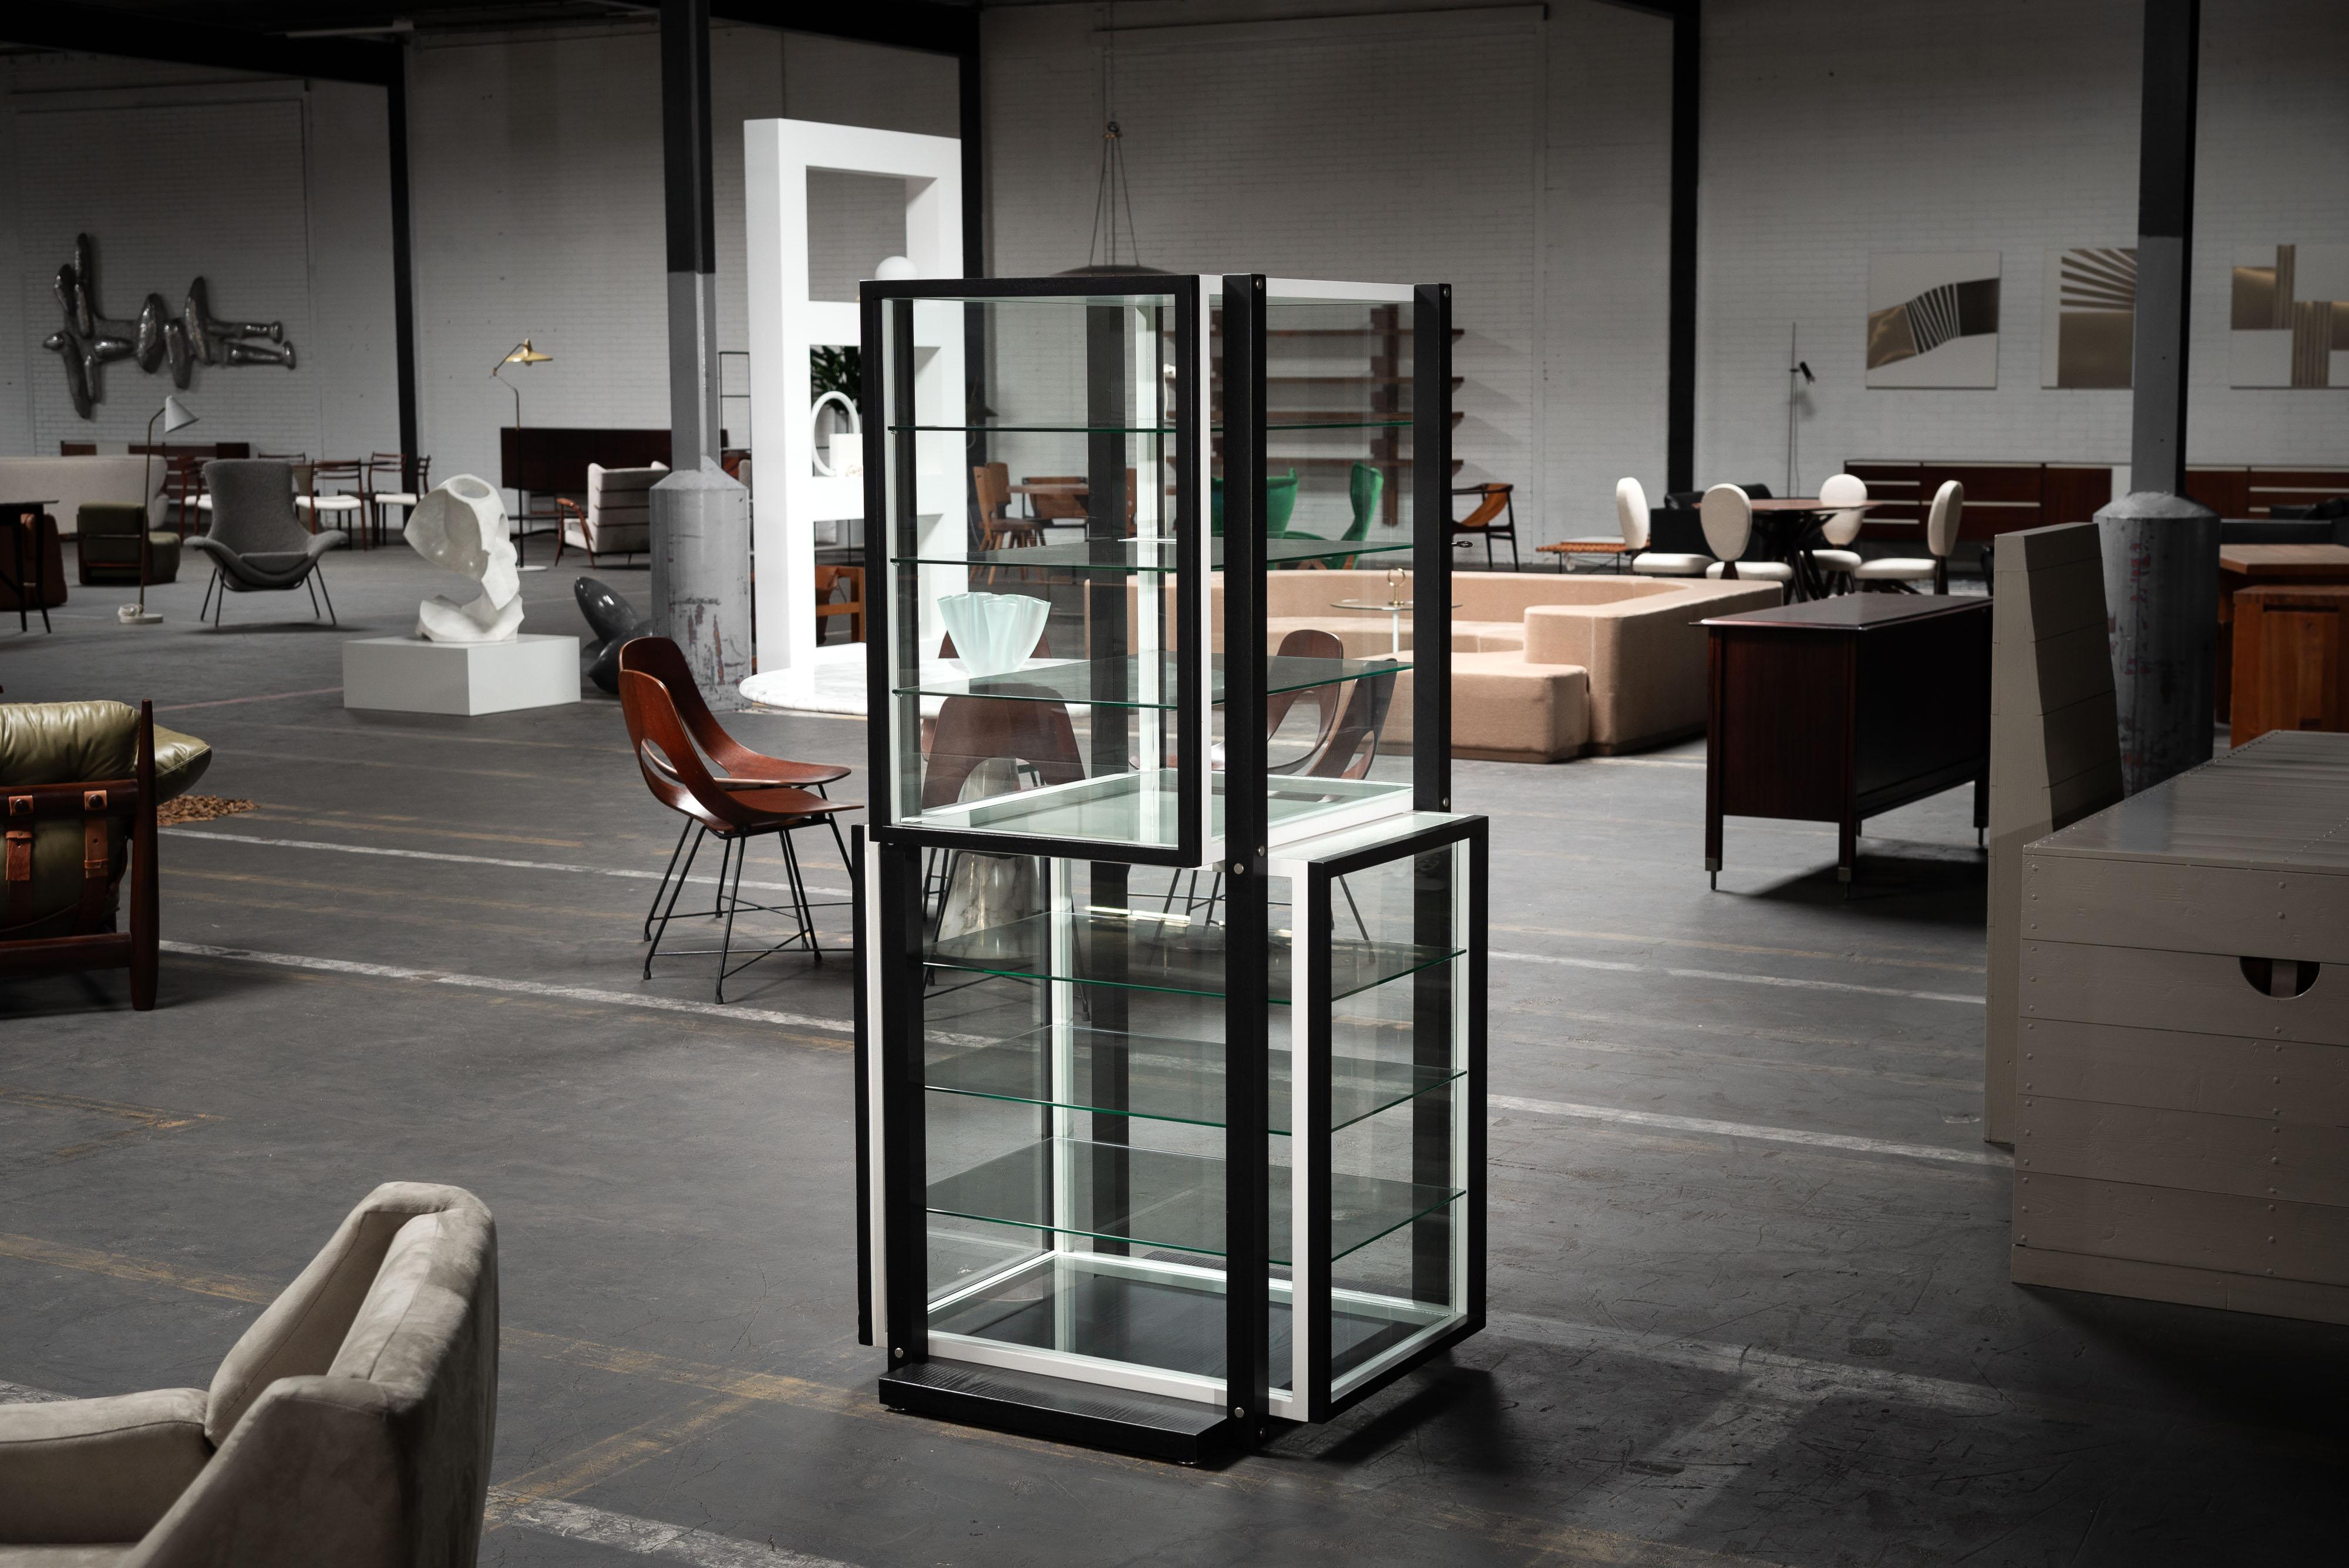 Rare display cabinet model S40, originally designed by Marcel Breuer in 1925. Re-editioned by Tecta Germany in the 1980s. Marcel Breuer always had a structural and architectural way of thinking. The S40 glass cabinet looks like a miniature New York